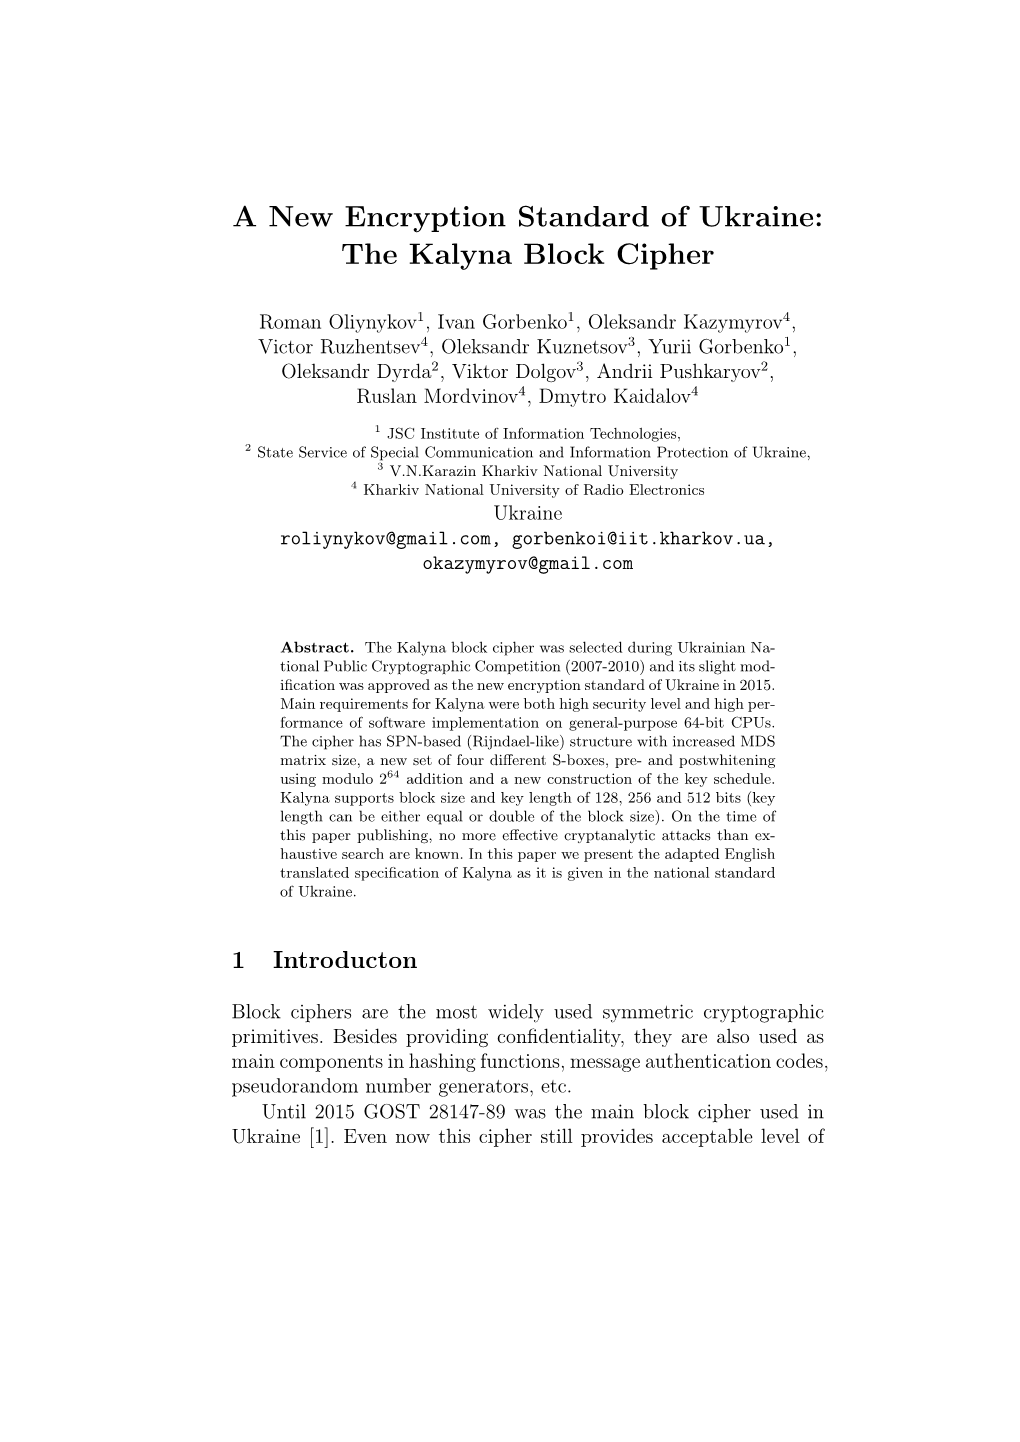 The Kalyna Block Cipher